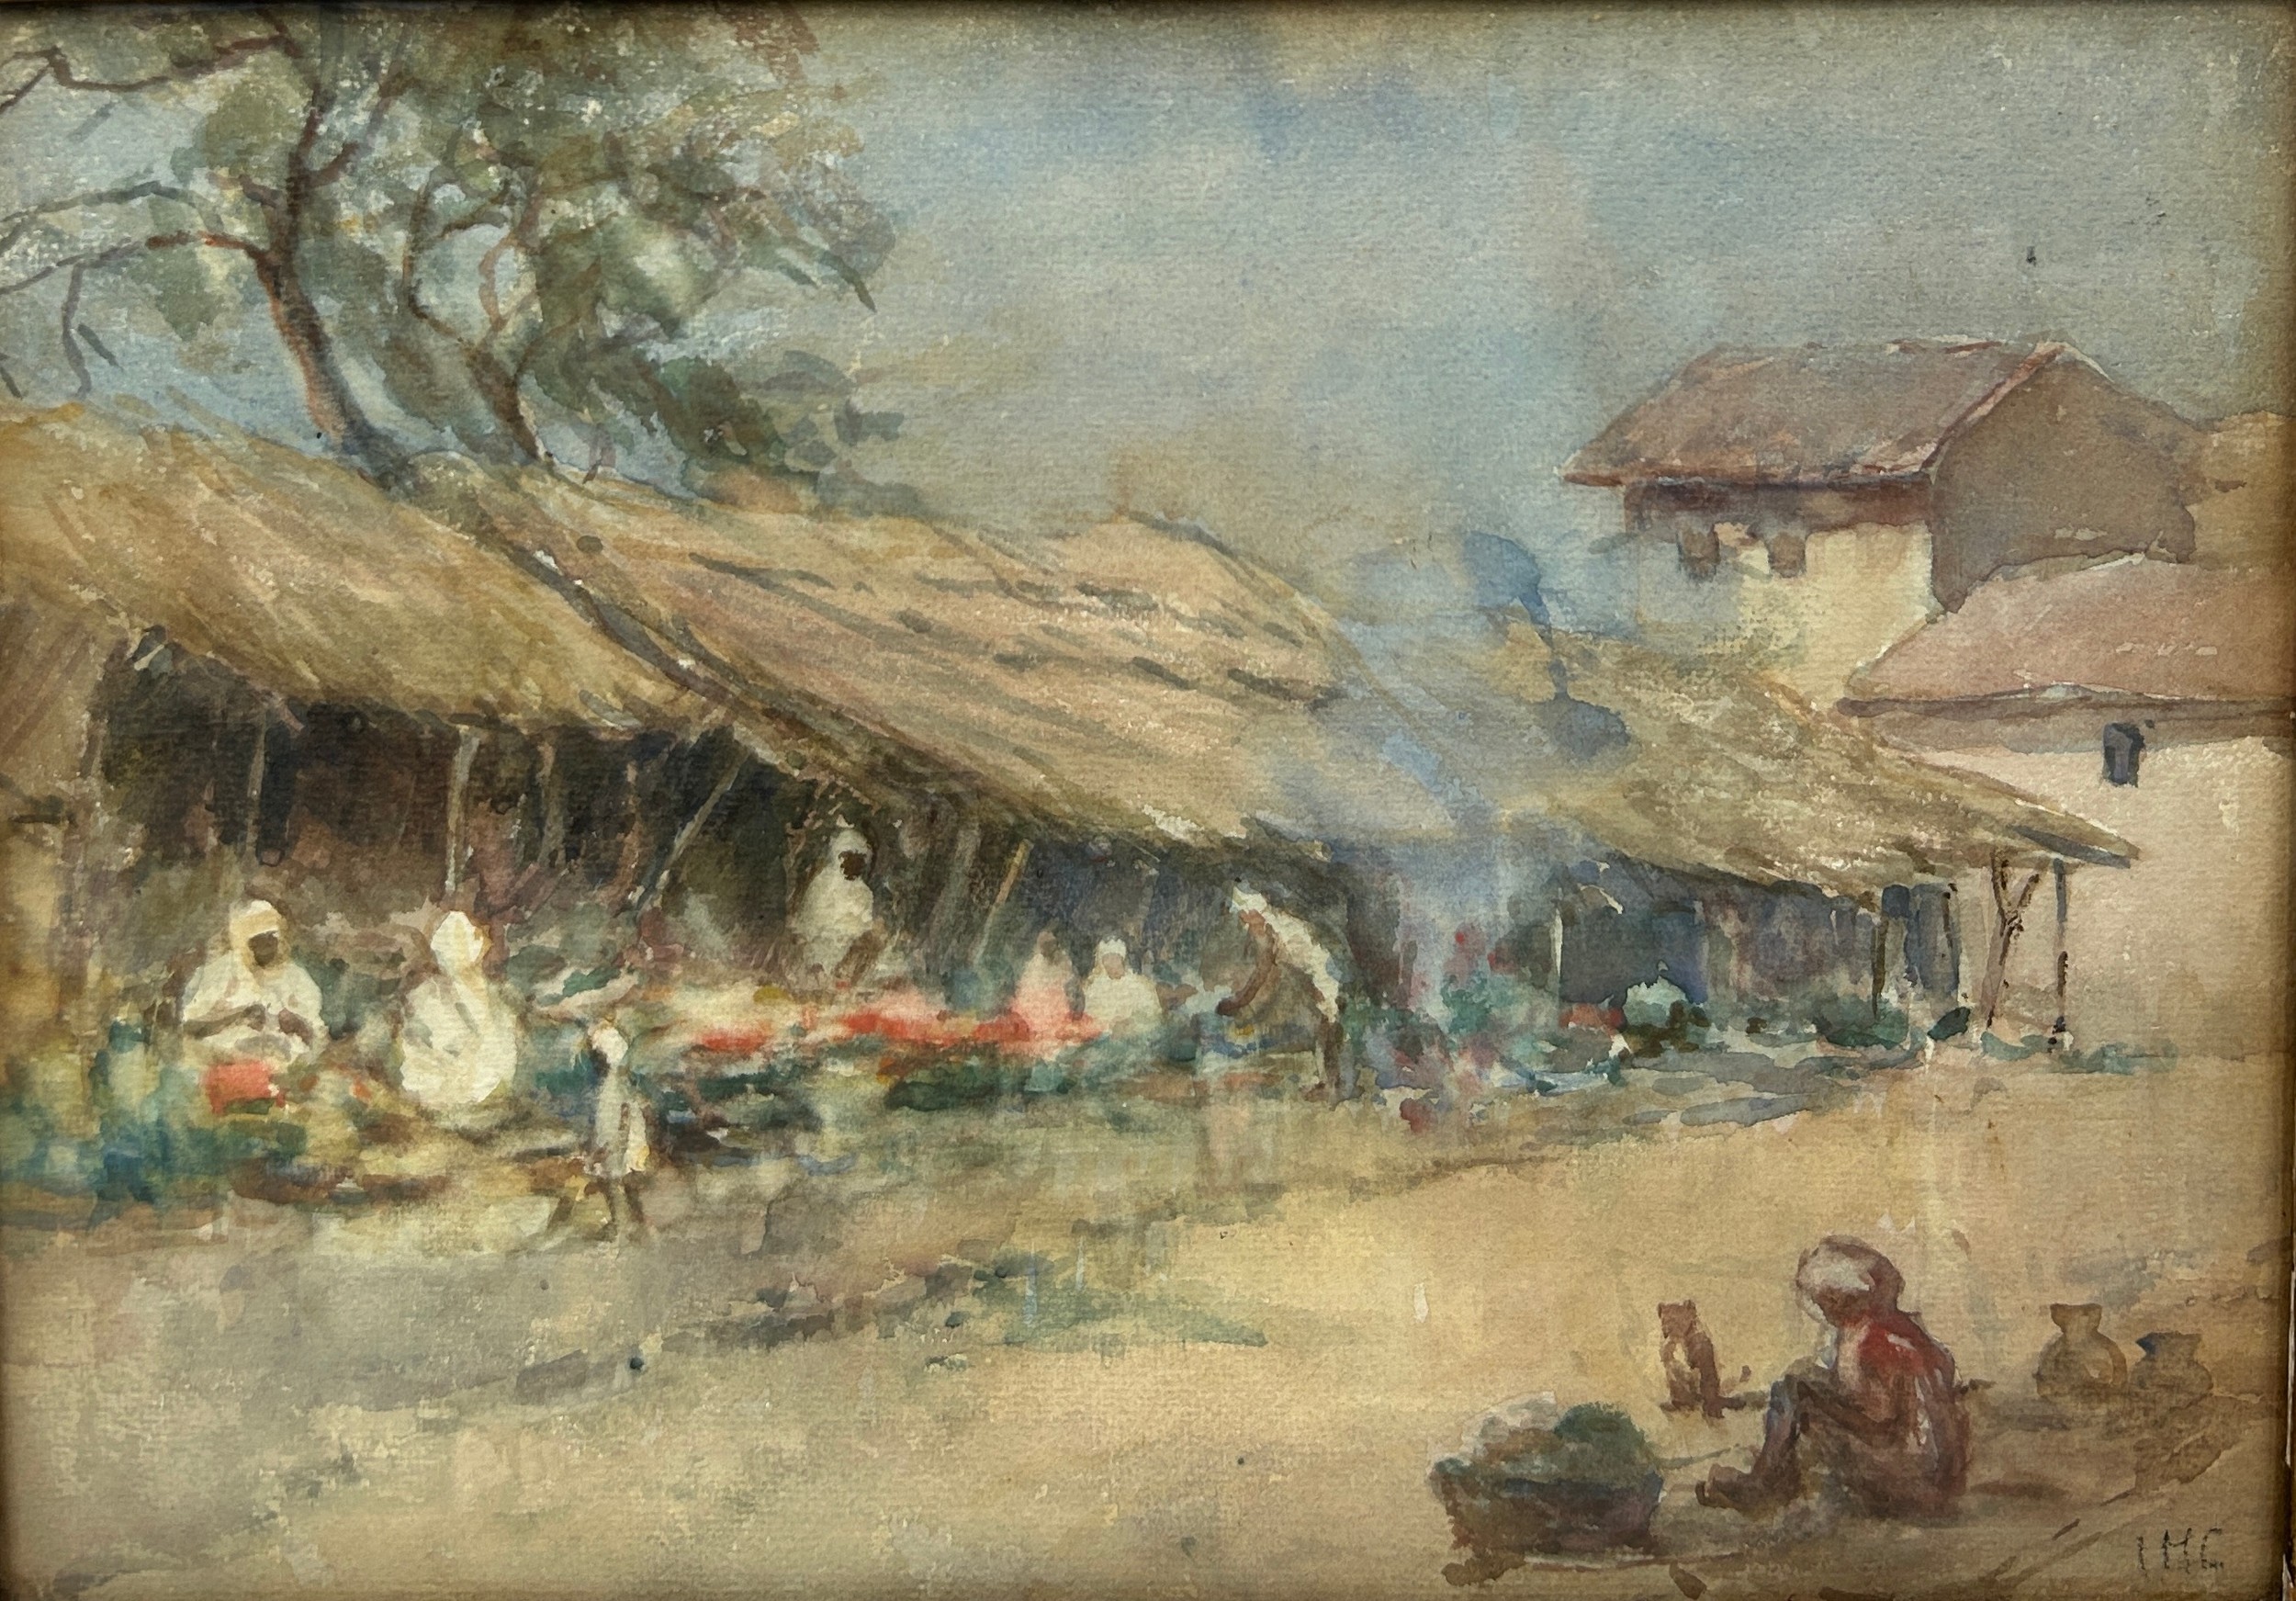 A 19TH CENTURY WATERCOLOUR PAINTING ON PAPER TITLED 'IN THE BAZAAR, BENARES', INDIA WITH FIGURES - Image 2 of 4